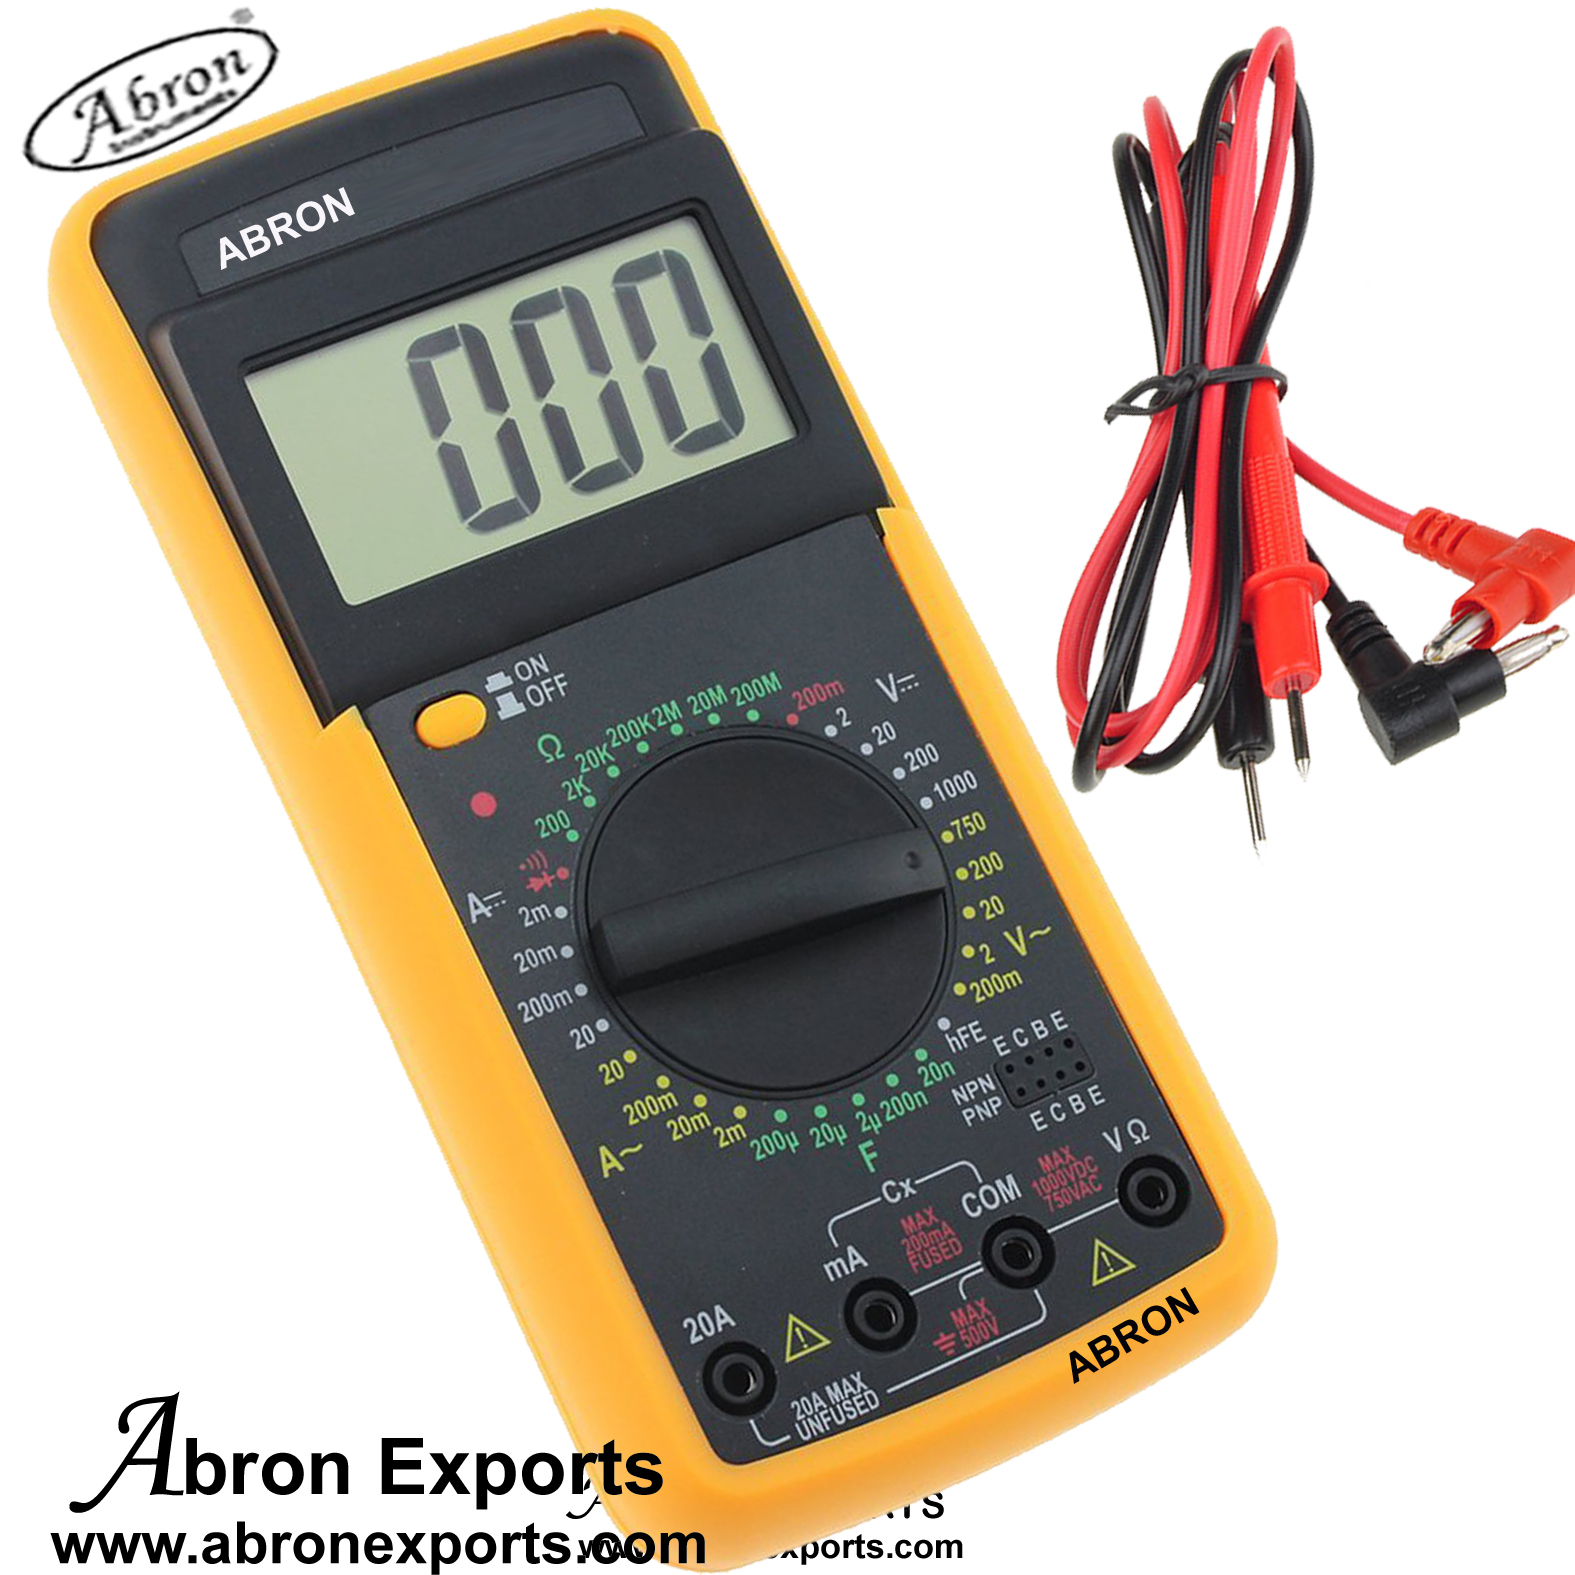 Capacitance Meter Digital Dial Range LCD 10pf- 30 mfd LCD 9V Battery Operated With Pair of Probes AE-1319CR 